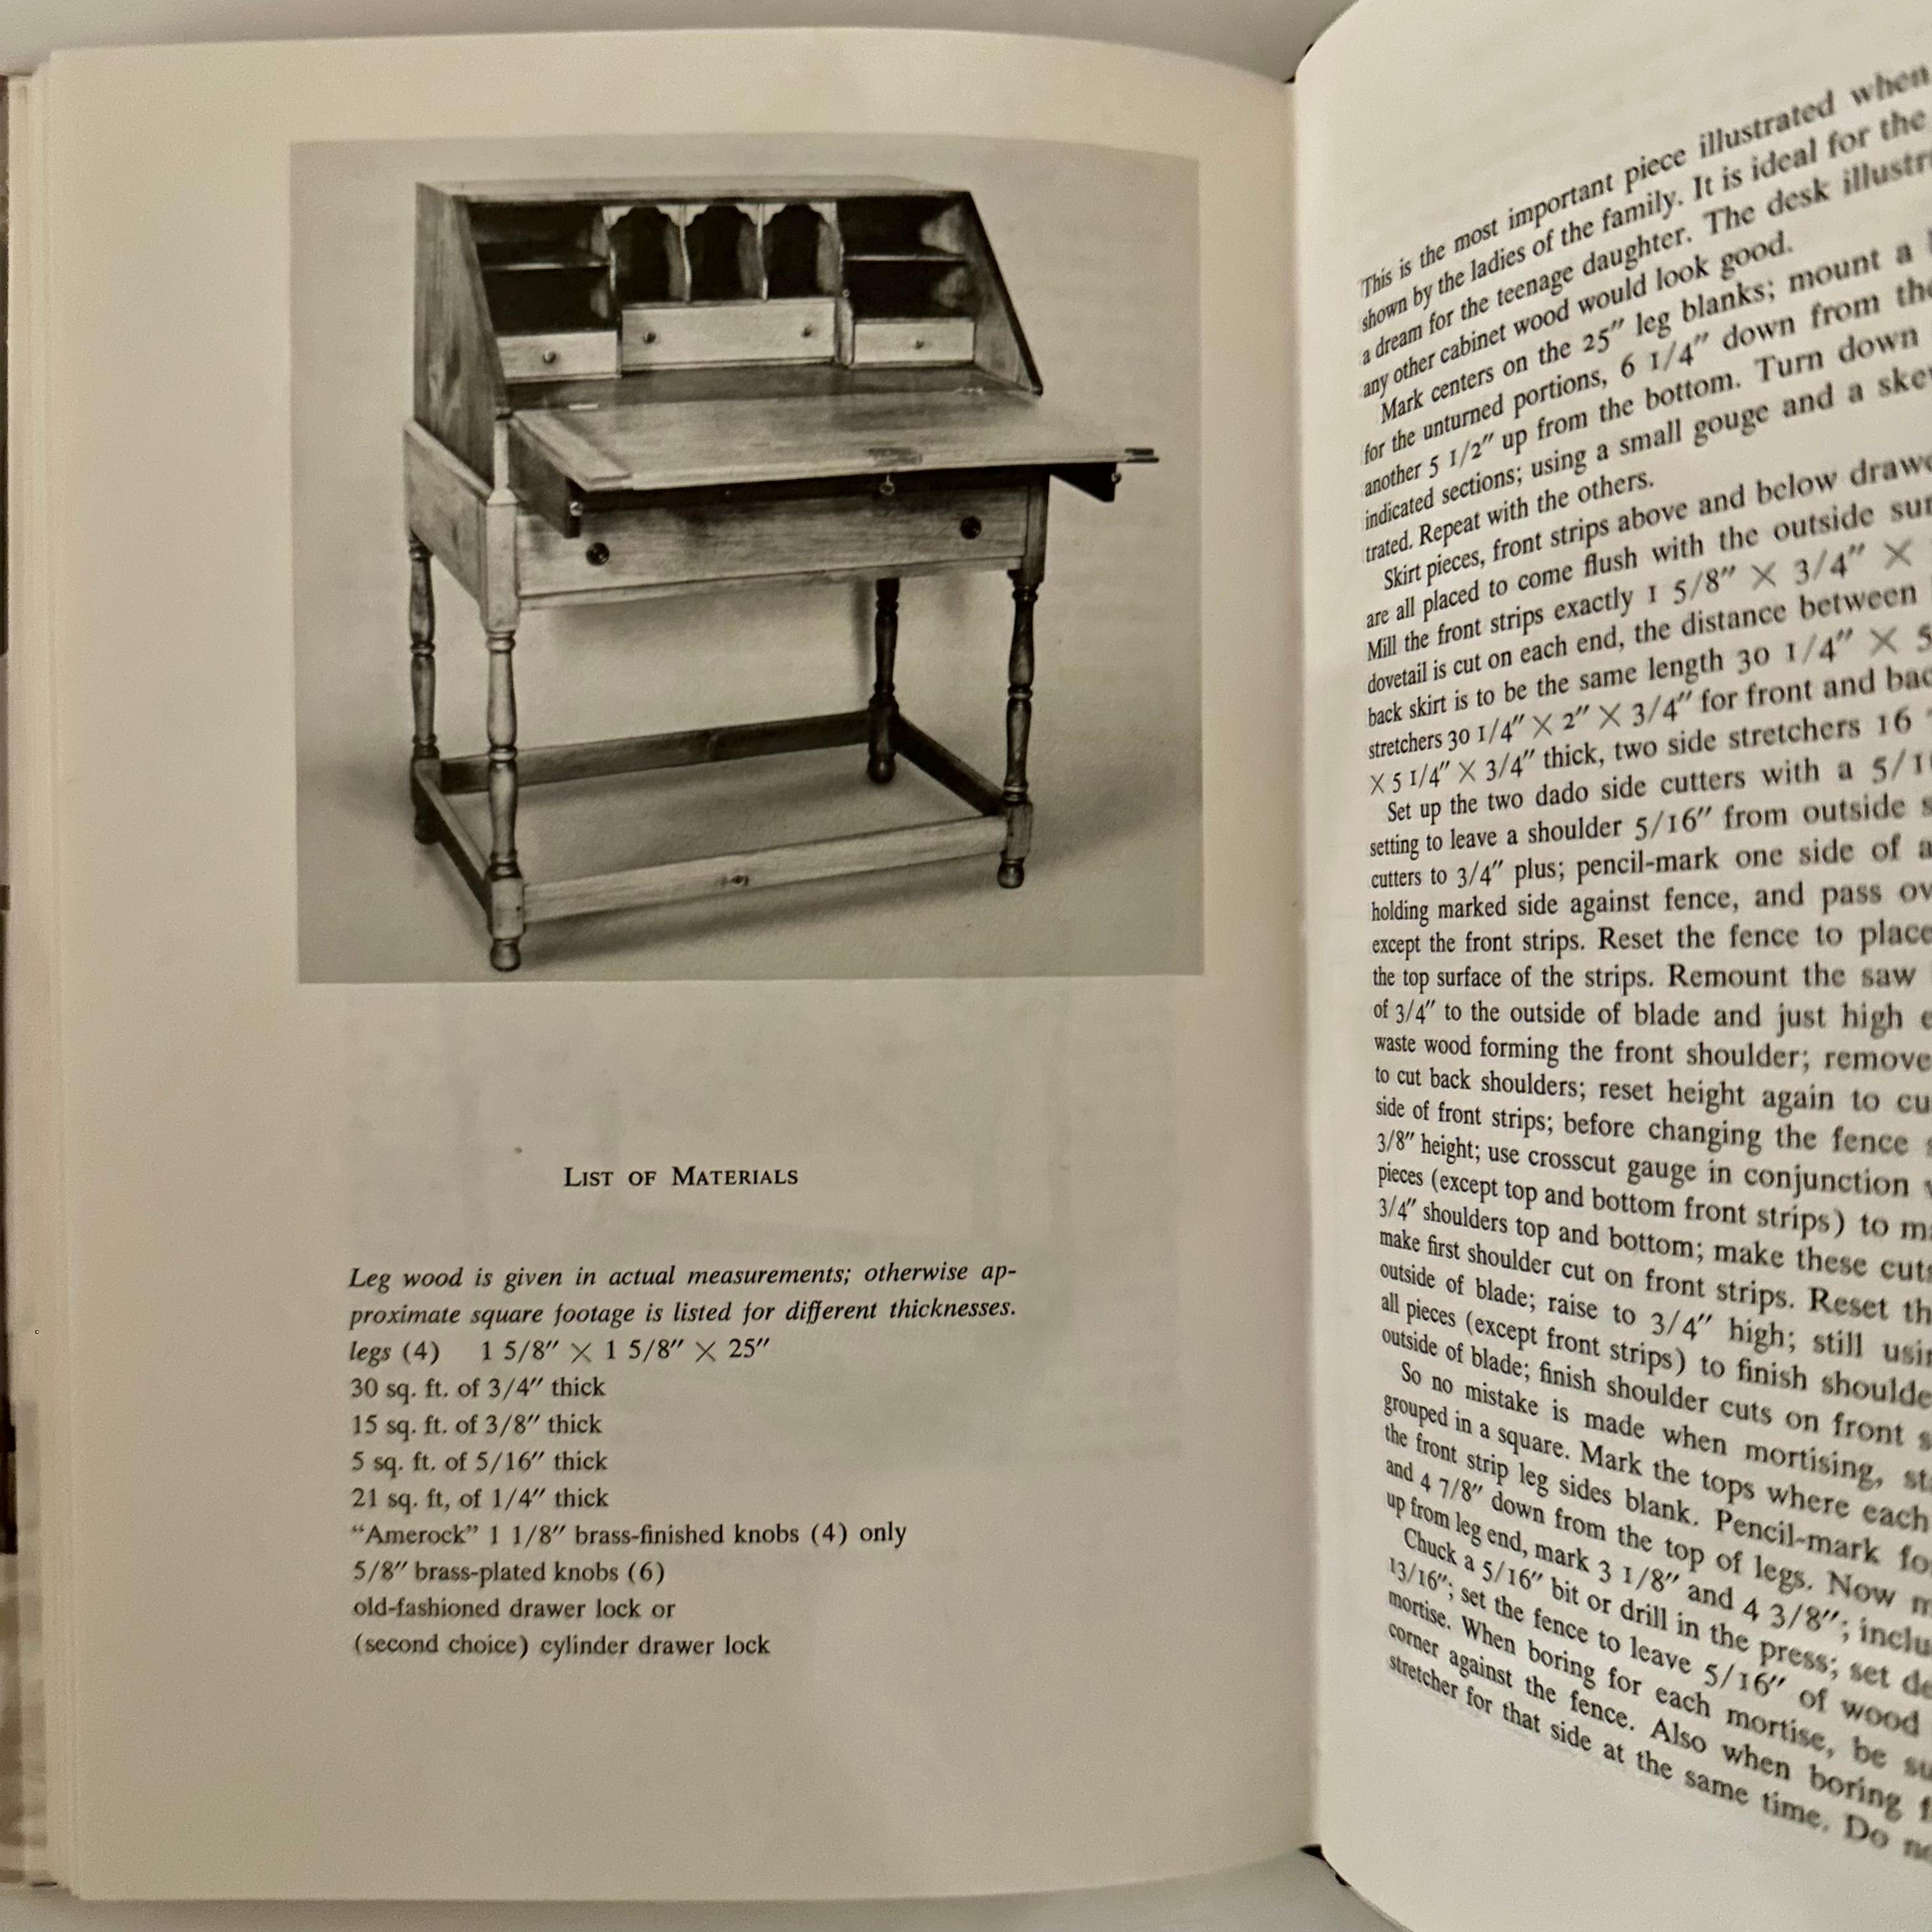 Paper The Early American Furniture Maker's Manual - A. W. Marlow - New York, 1974 For Sale